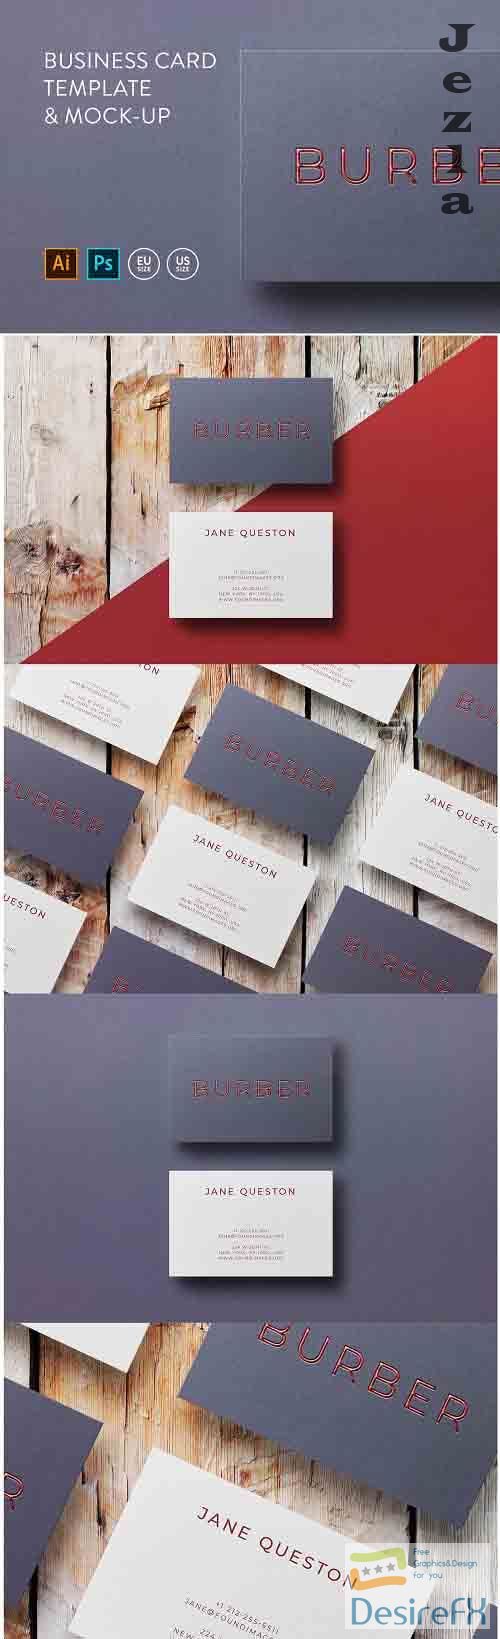 Business card Template &amp; Mock-up #5 - 63944